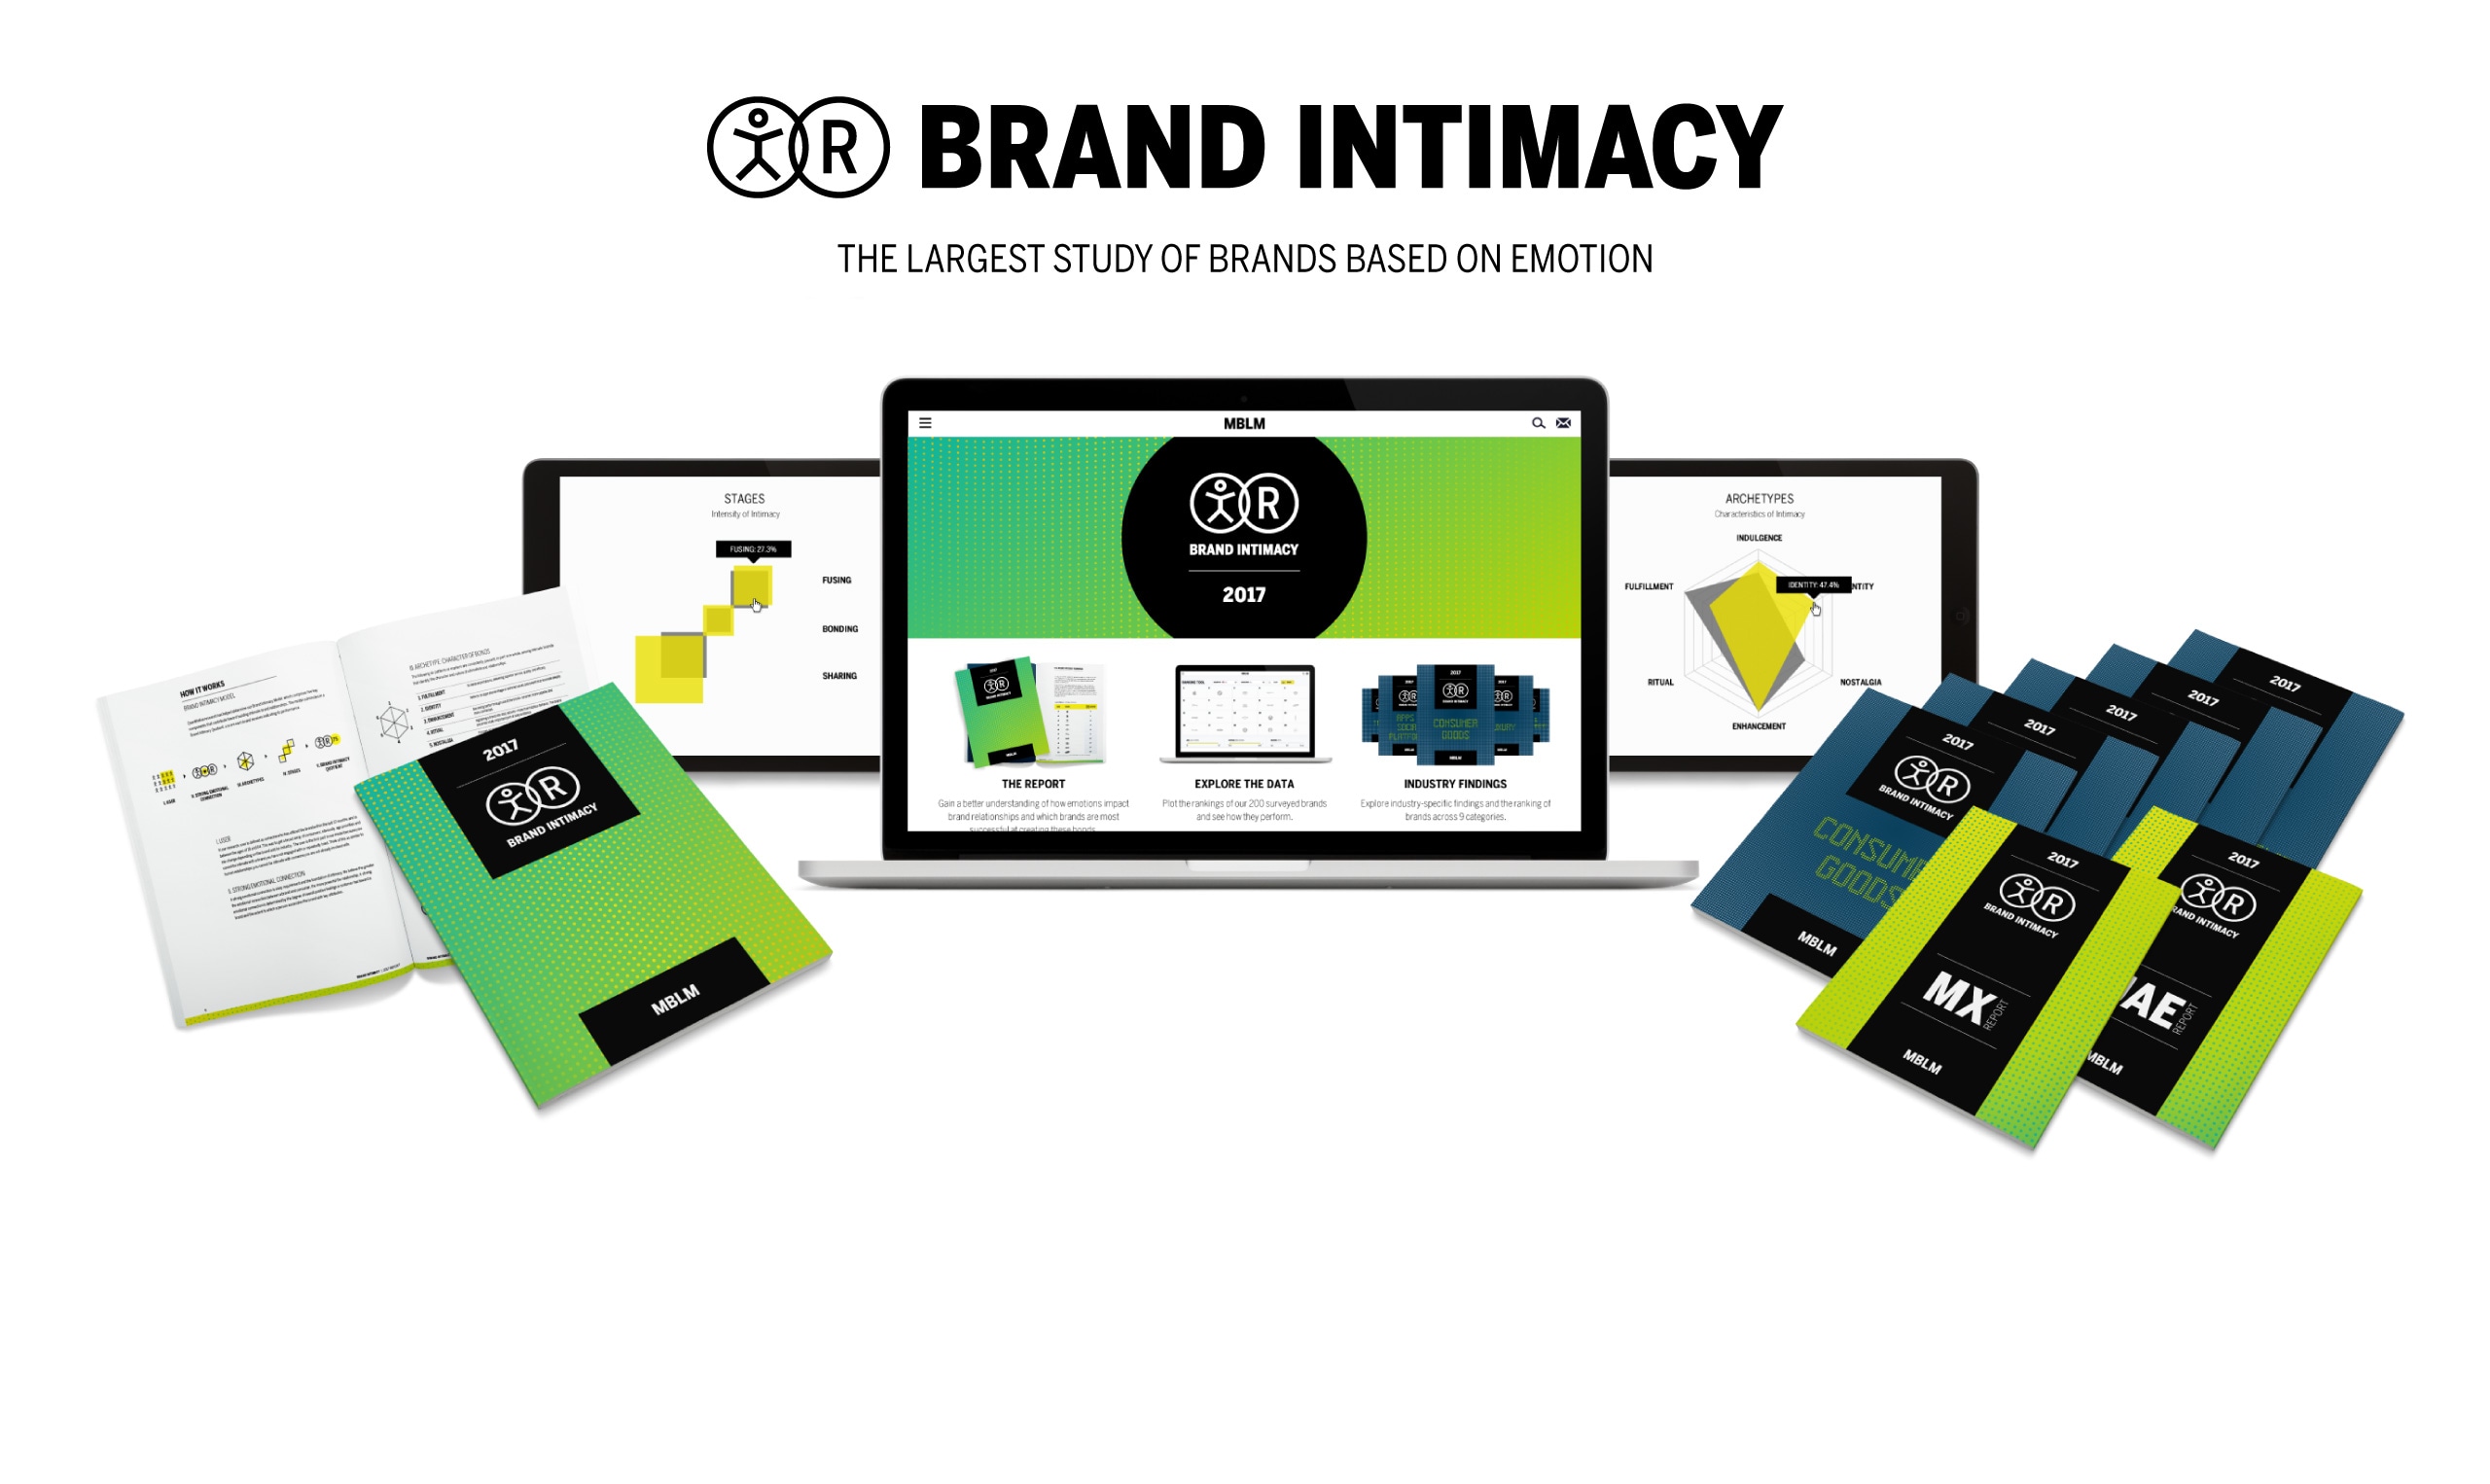 30 brand intimacy - the ultimate guide to brand intimacy.